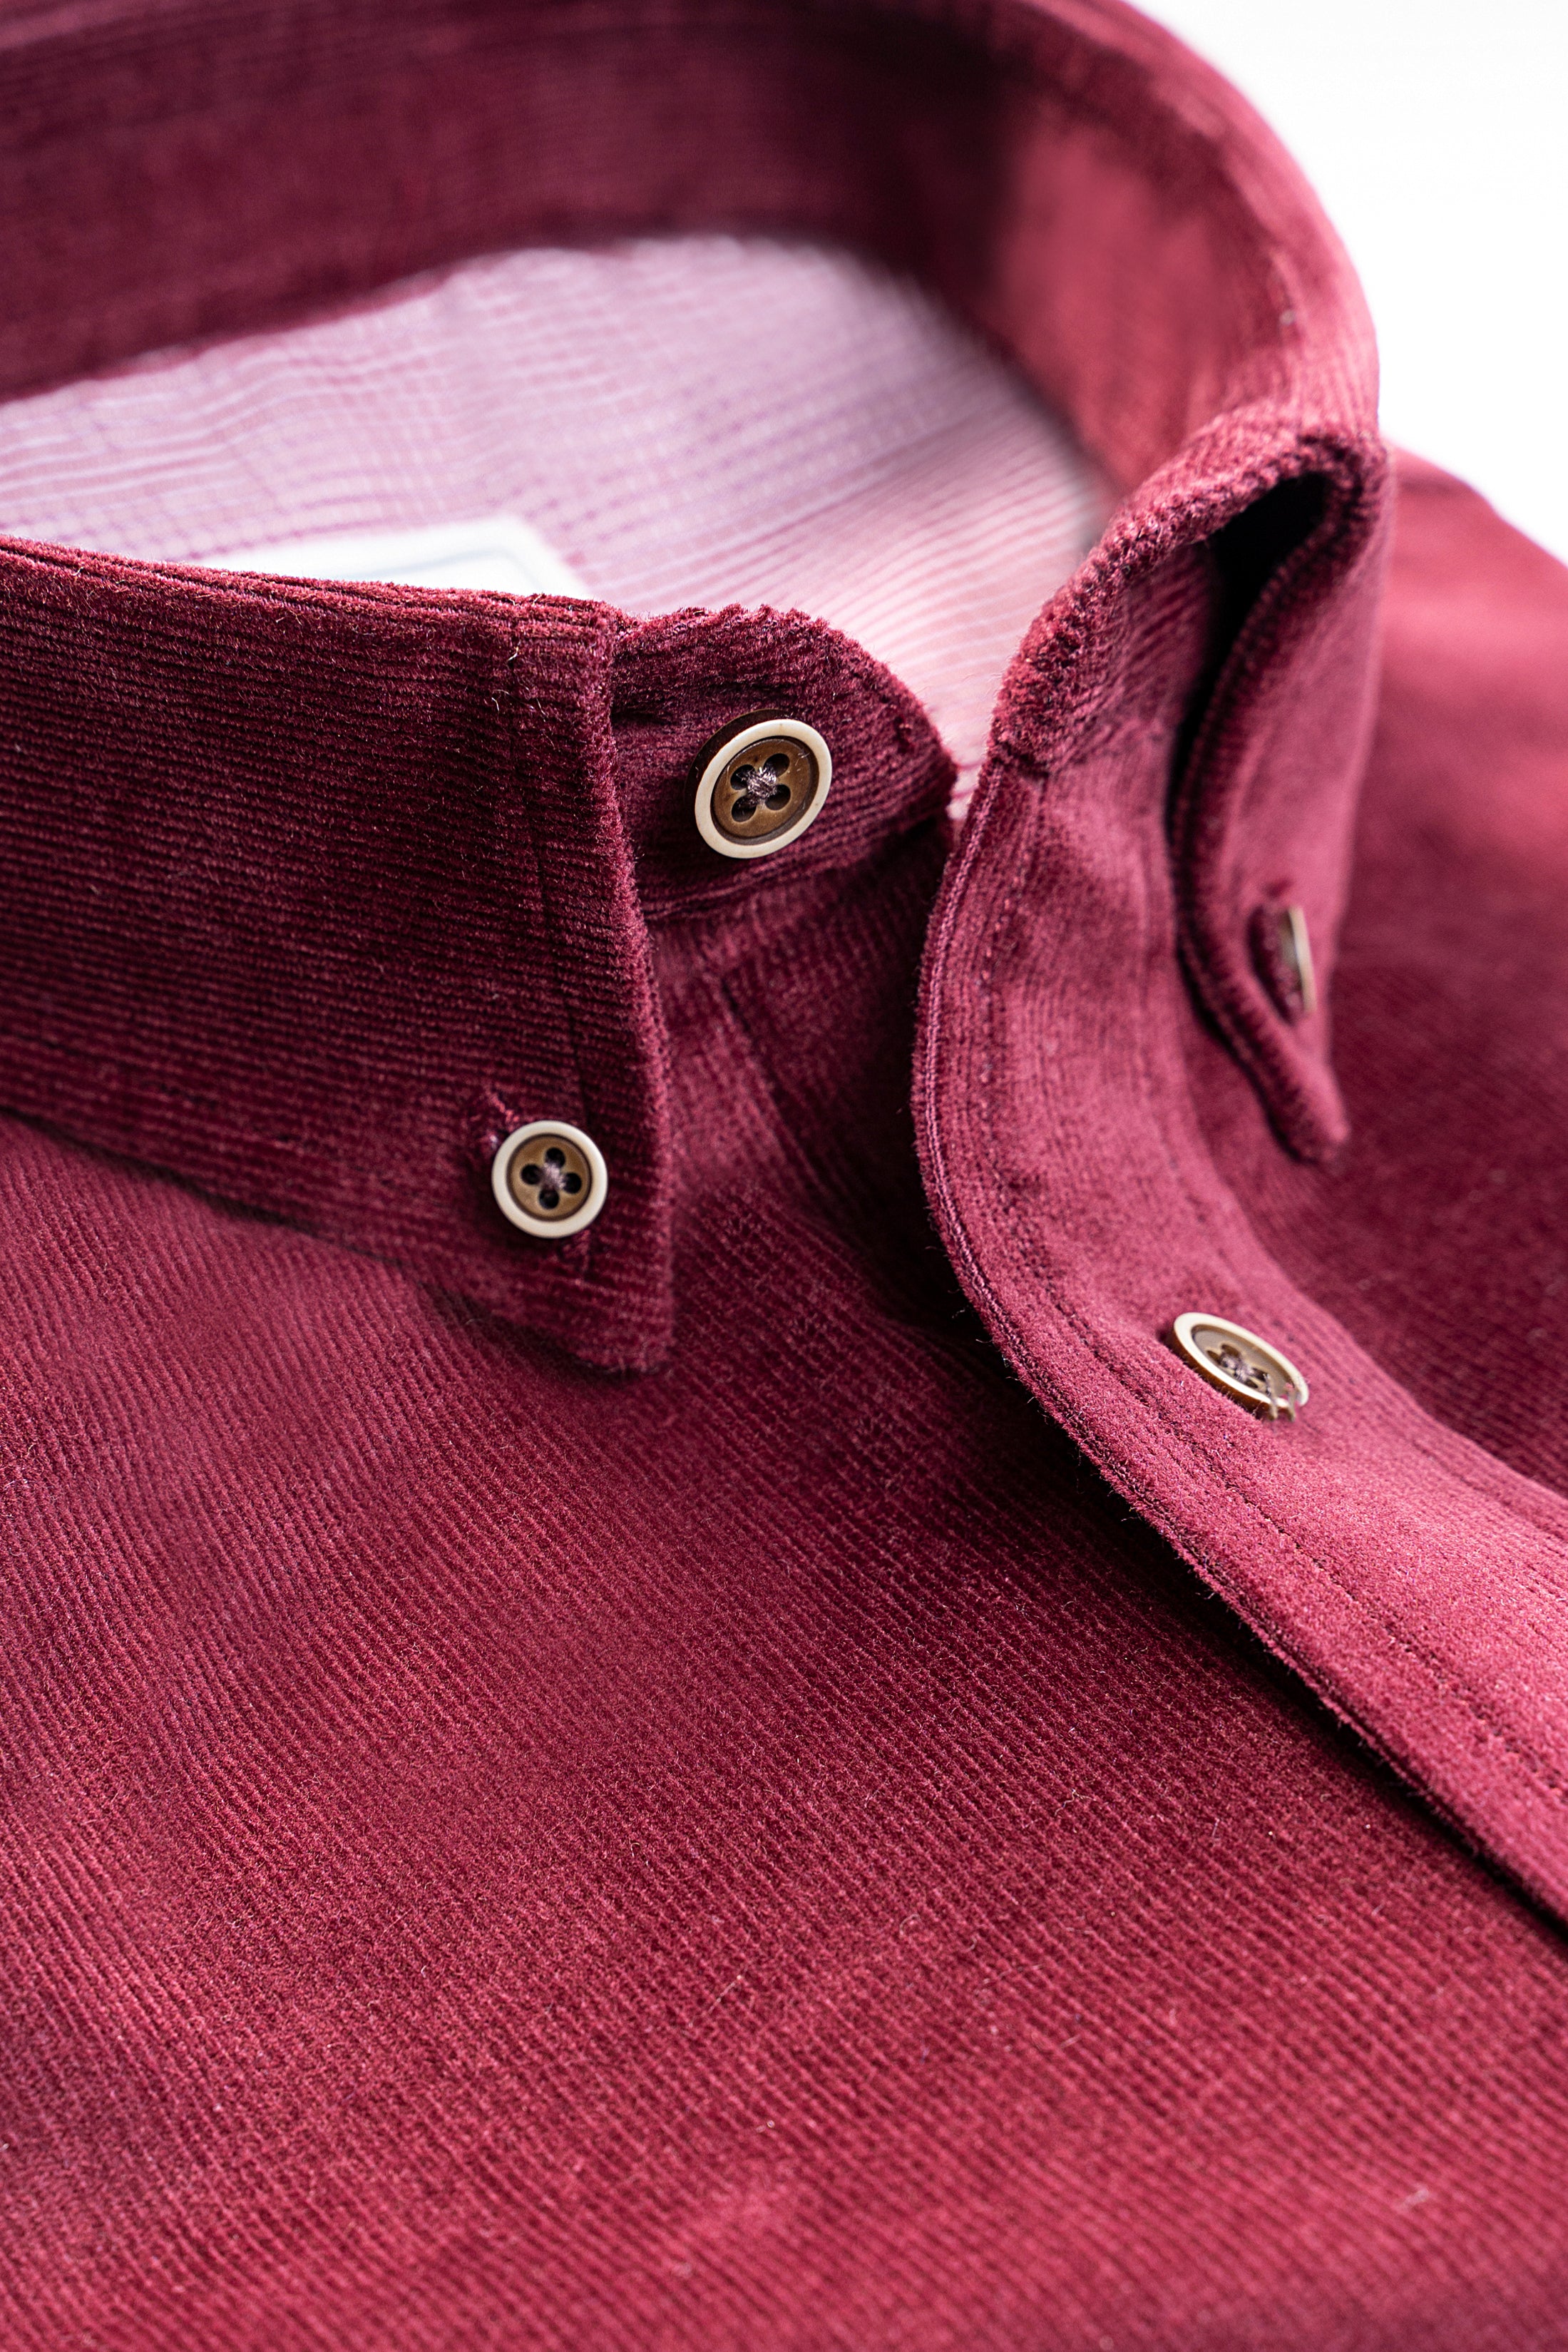 CORDUROY LIMITED EDITION SHIRT WINE RED